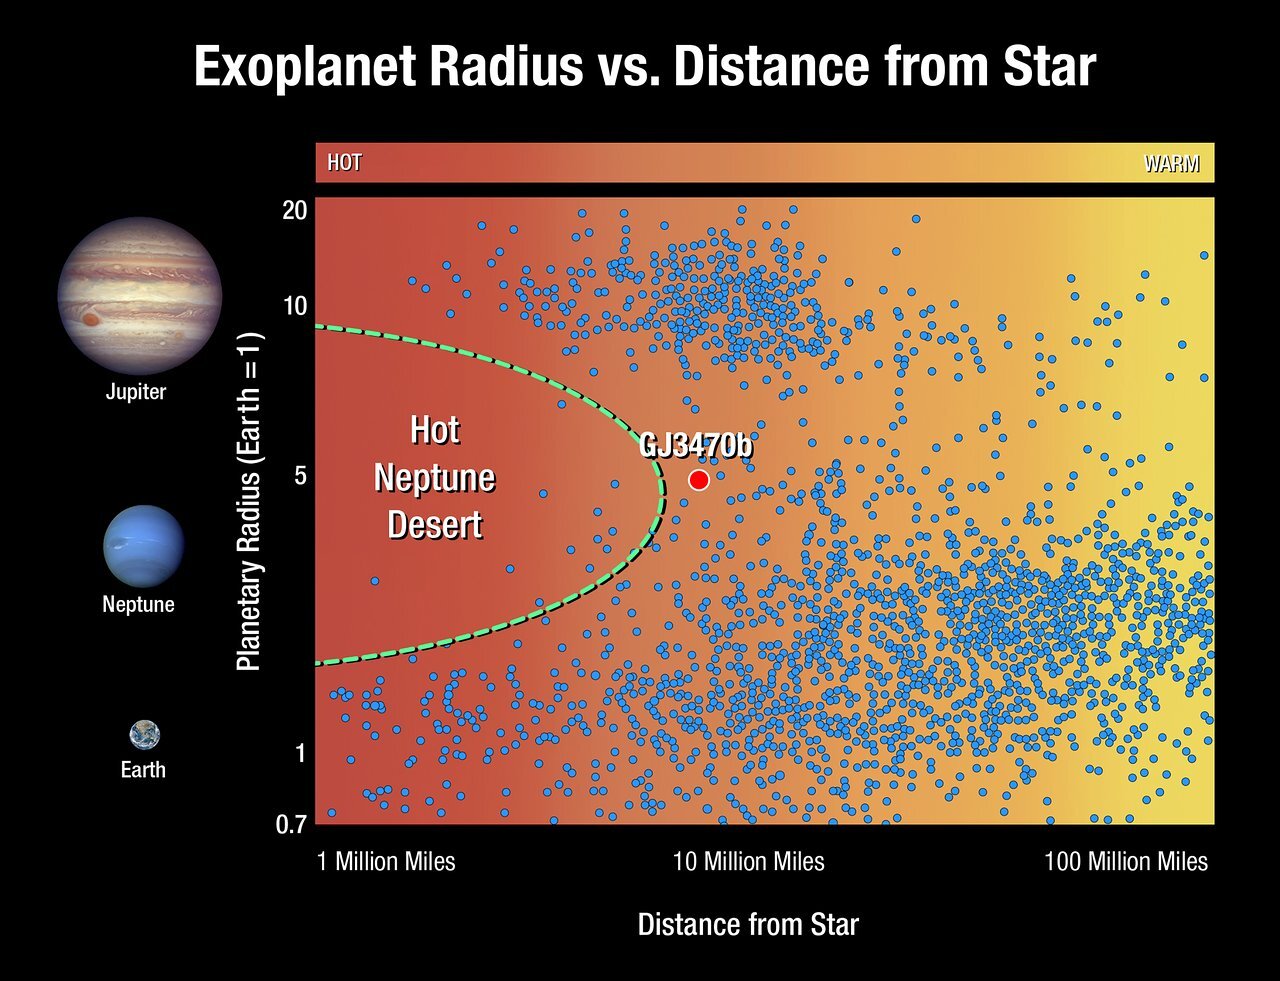 Exoplanet Radius vs. Distance from Star